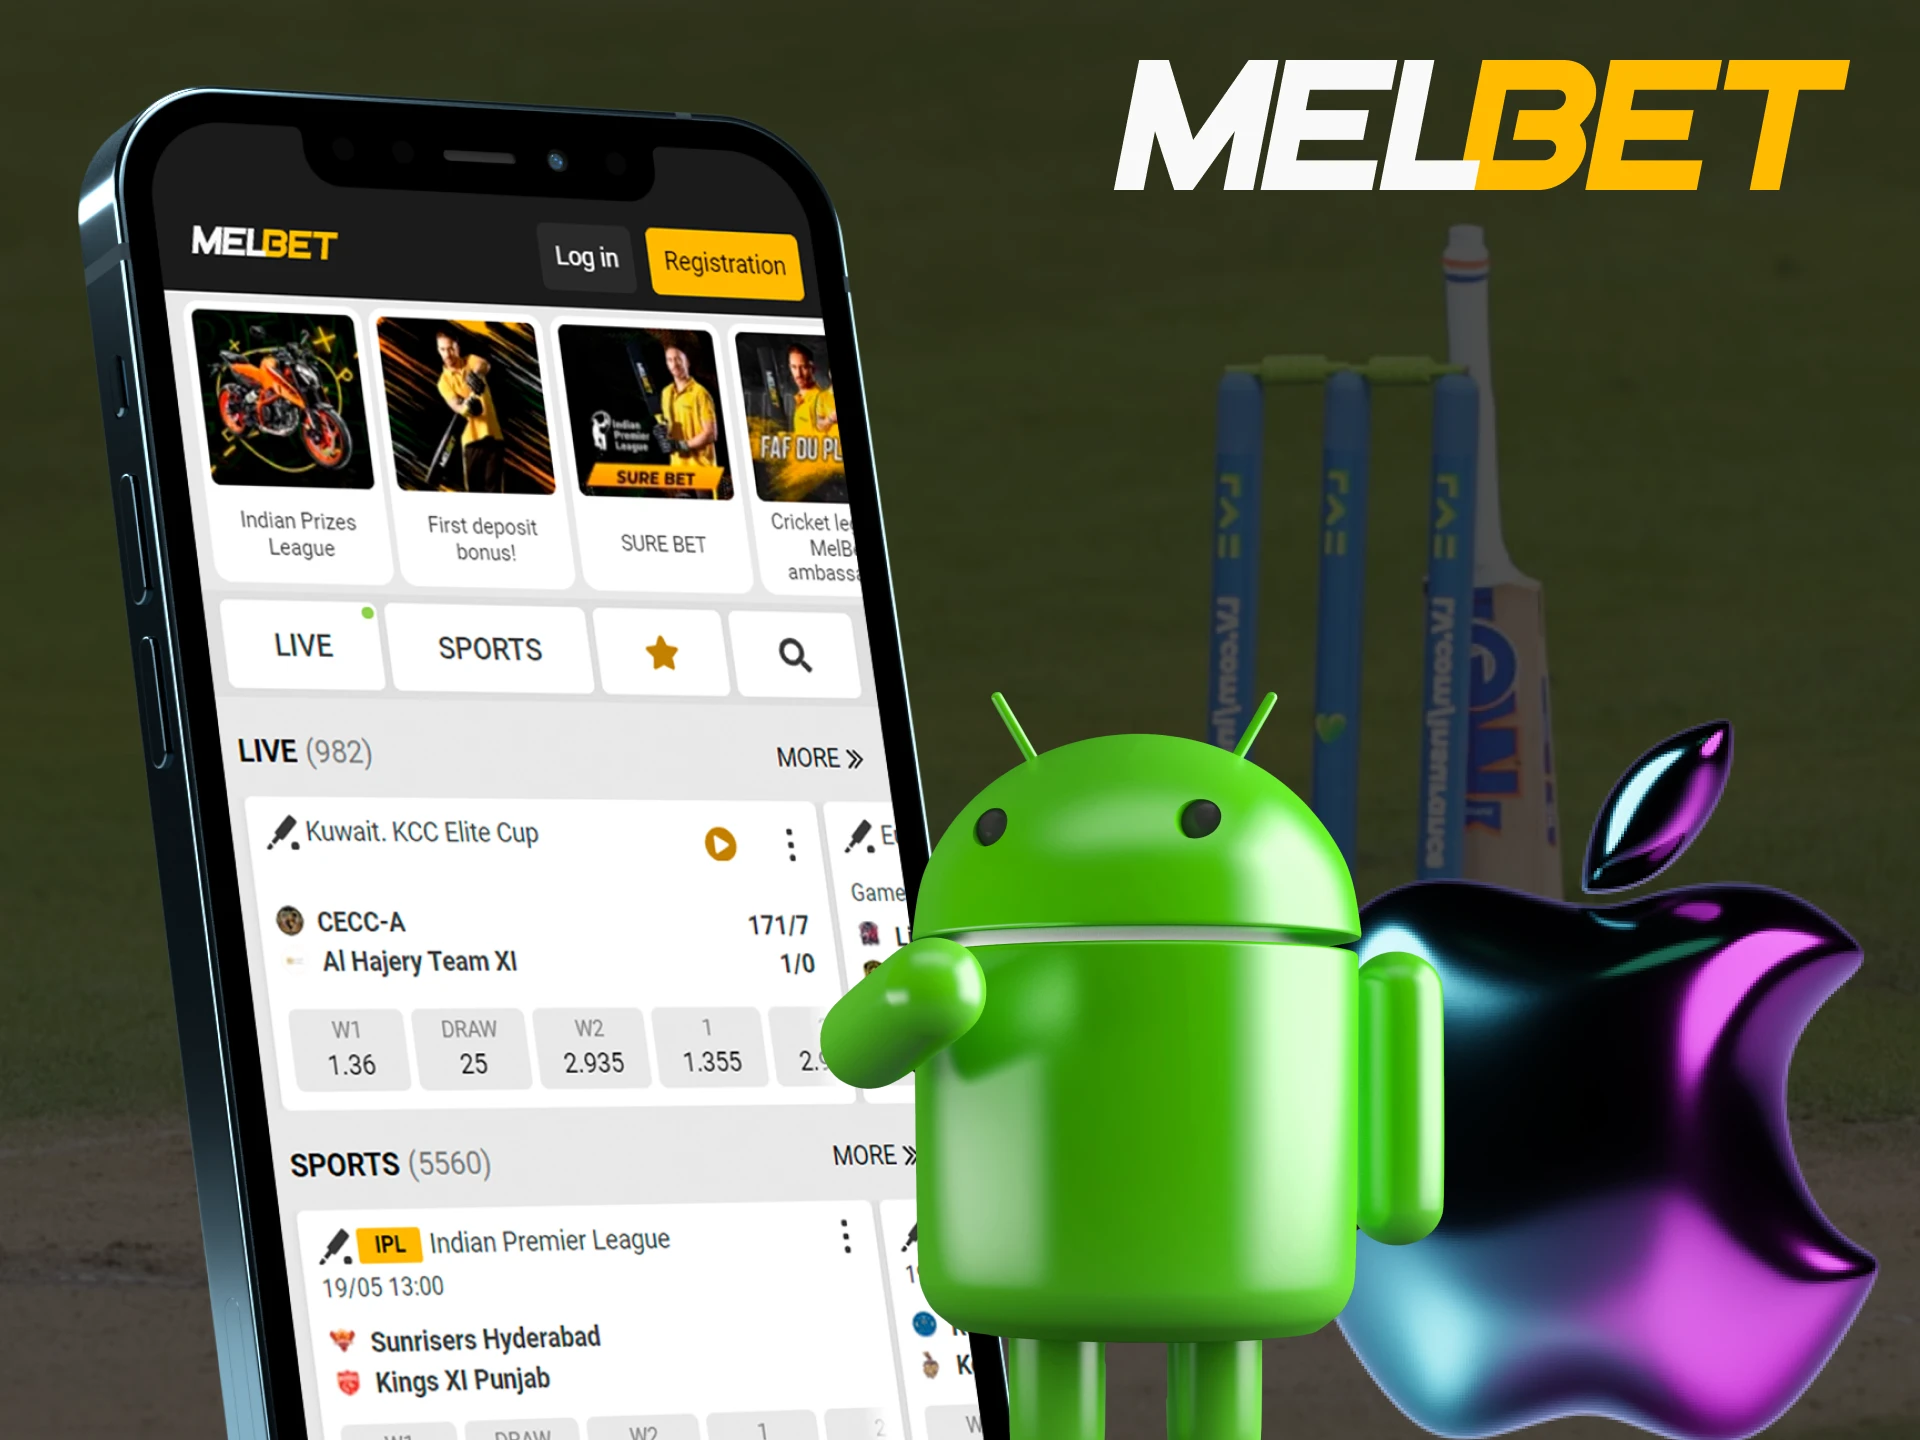 Place bets on sports and play casino games in the Melbet mobile app.